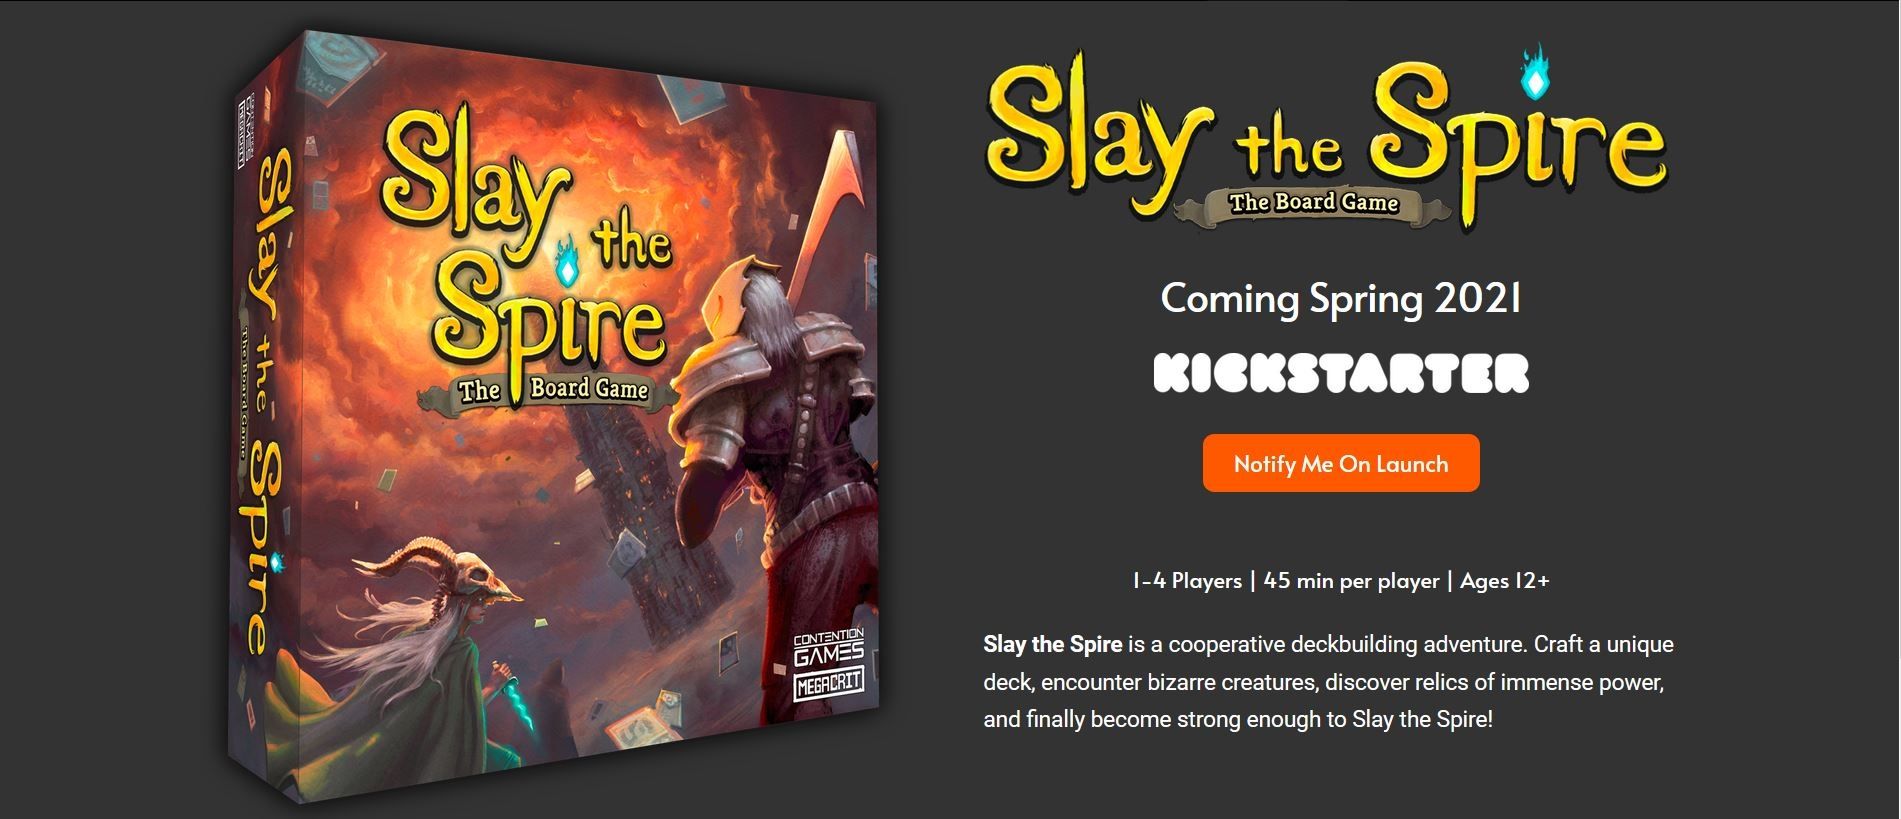 Slay the Spire Board Game